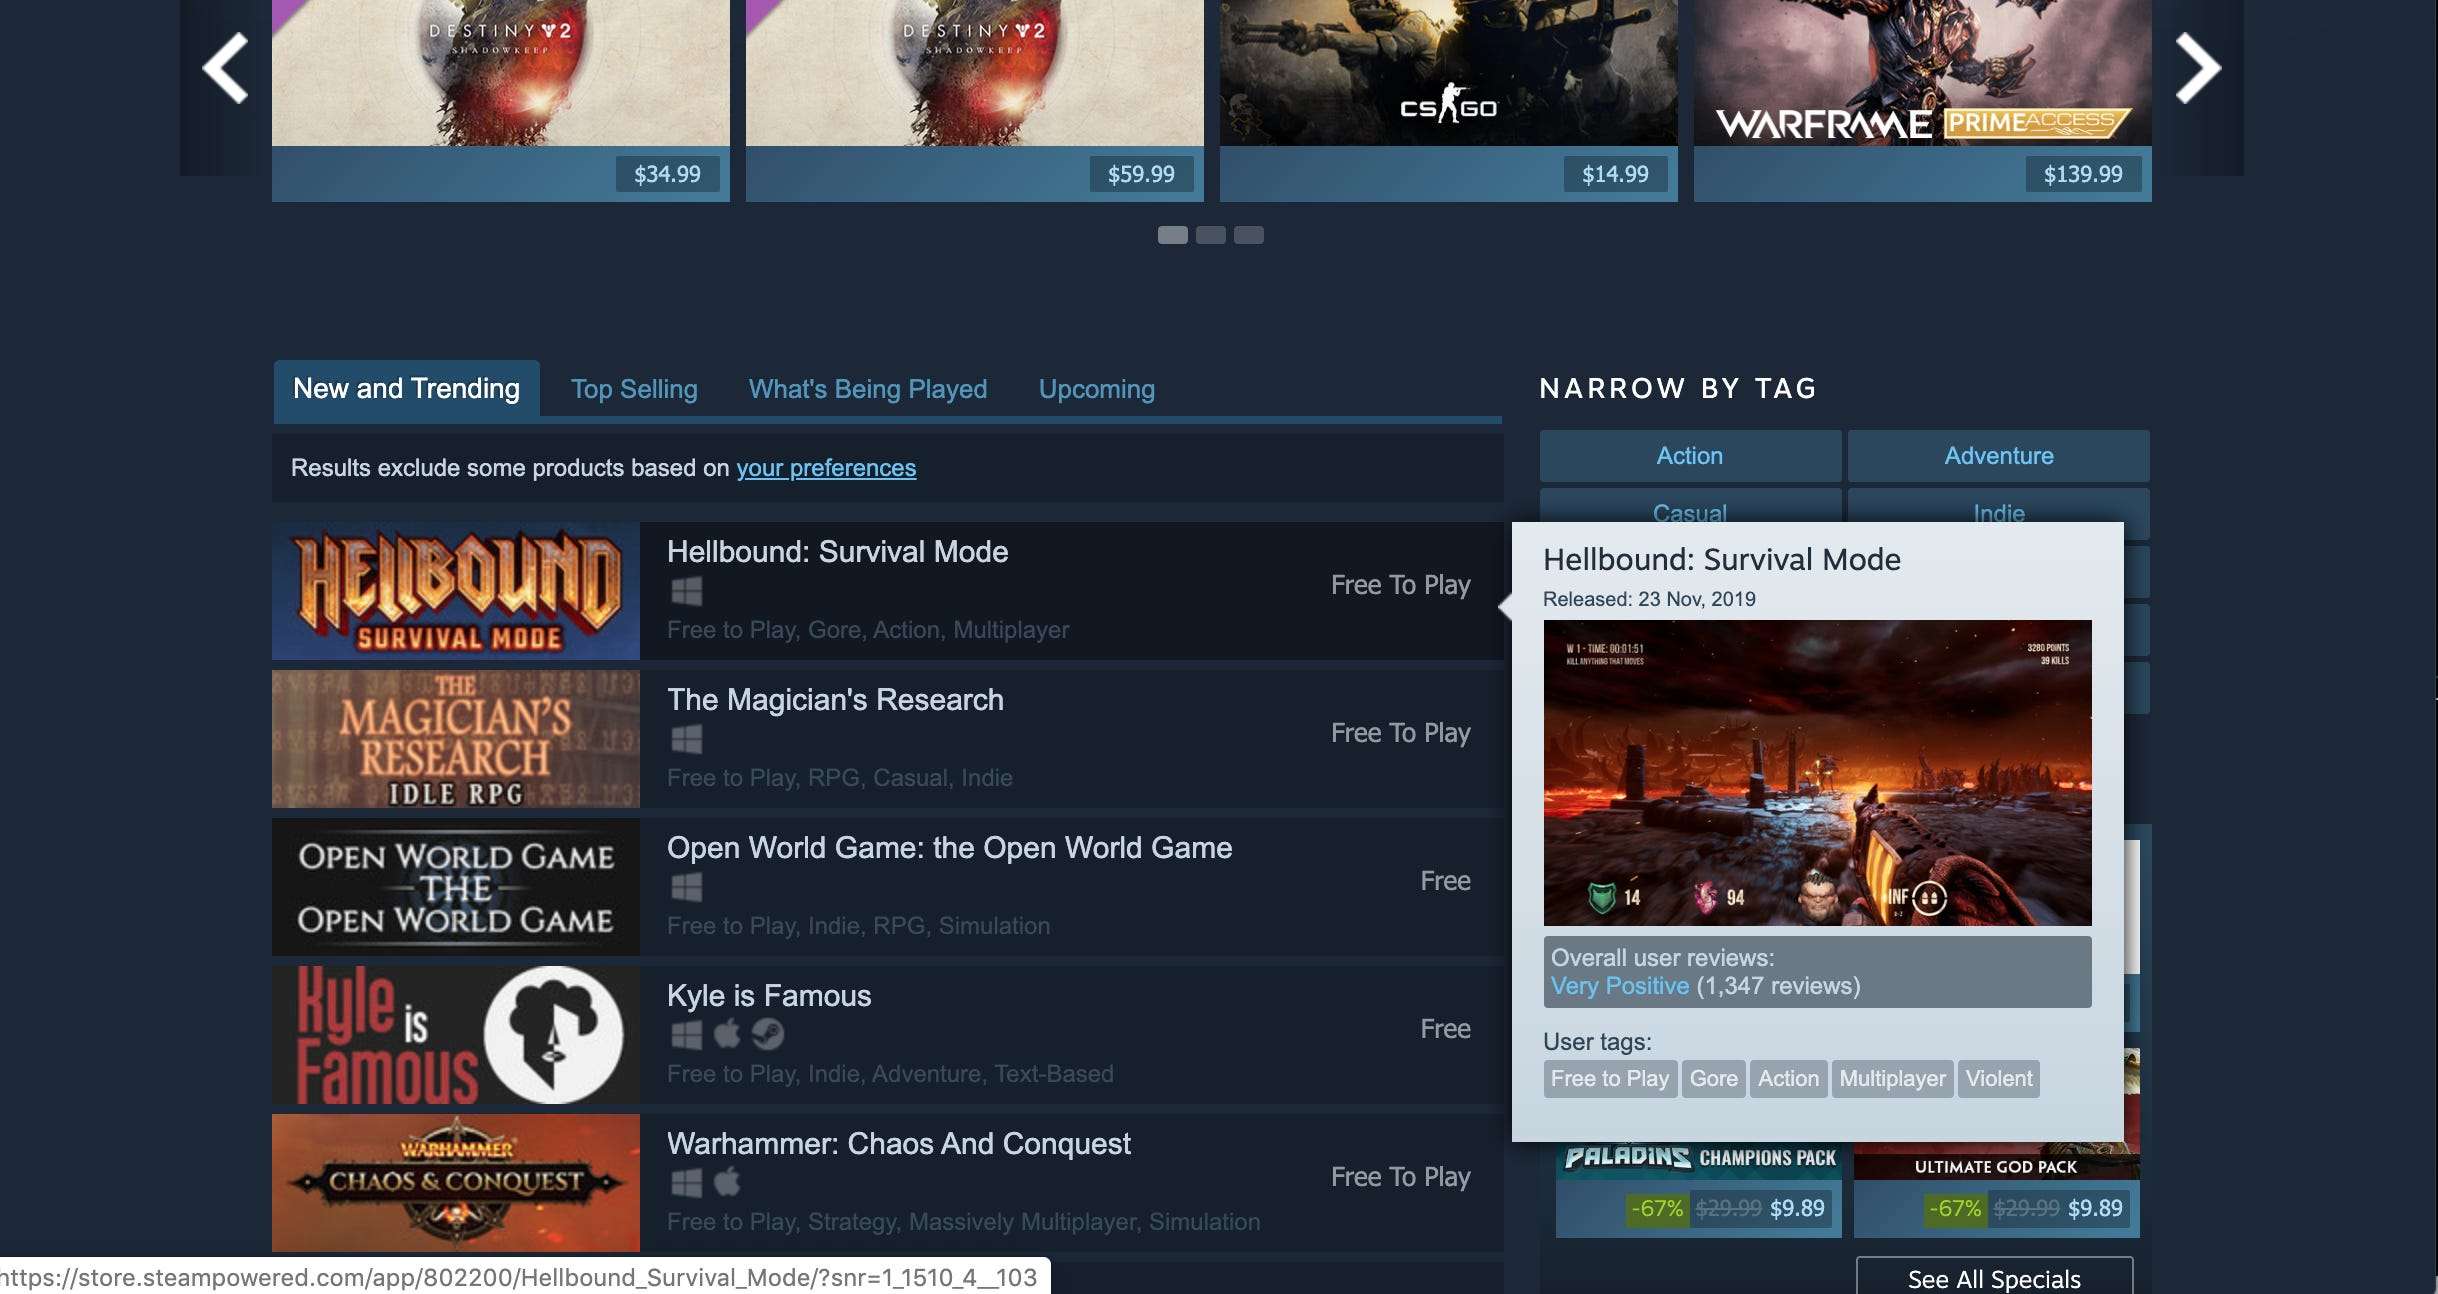 How to get free games on Steam in 2 ways, including through the